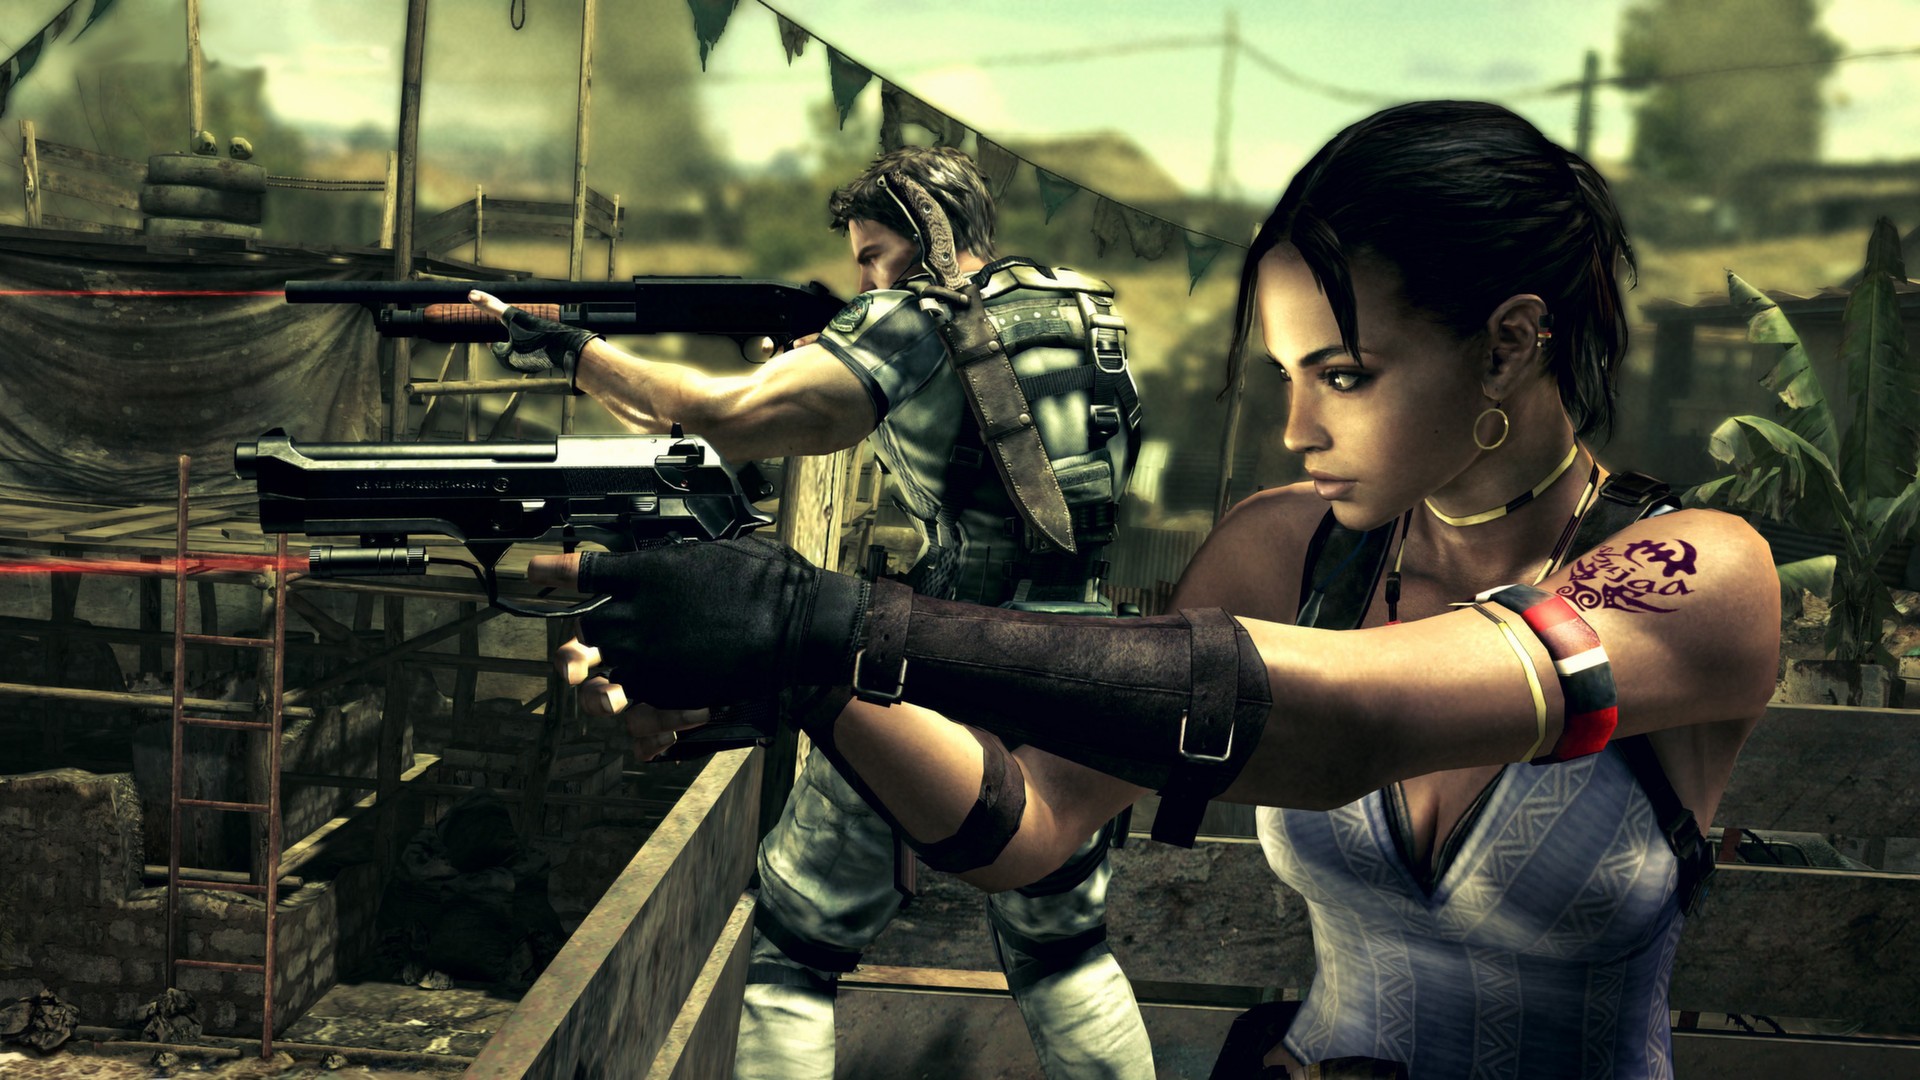 Buy Resident Evil 5 Gold Edition Steam Key, Instant Delivery